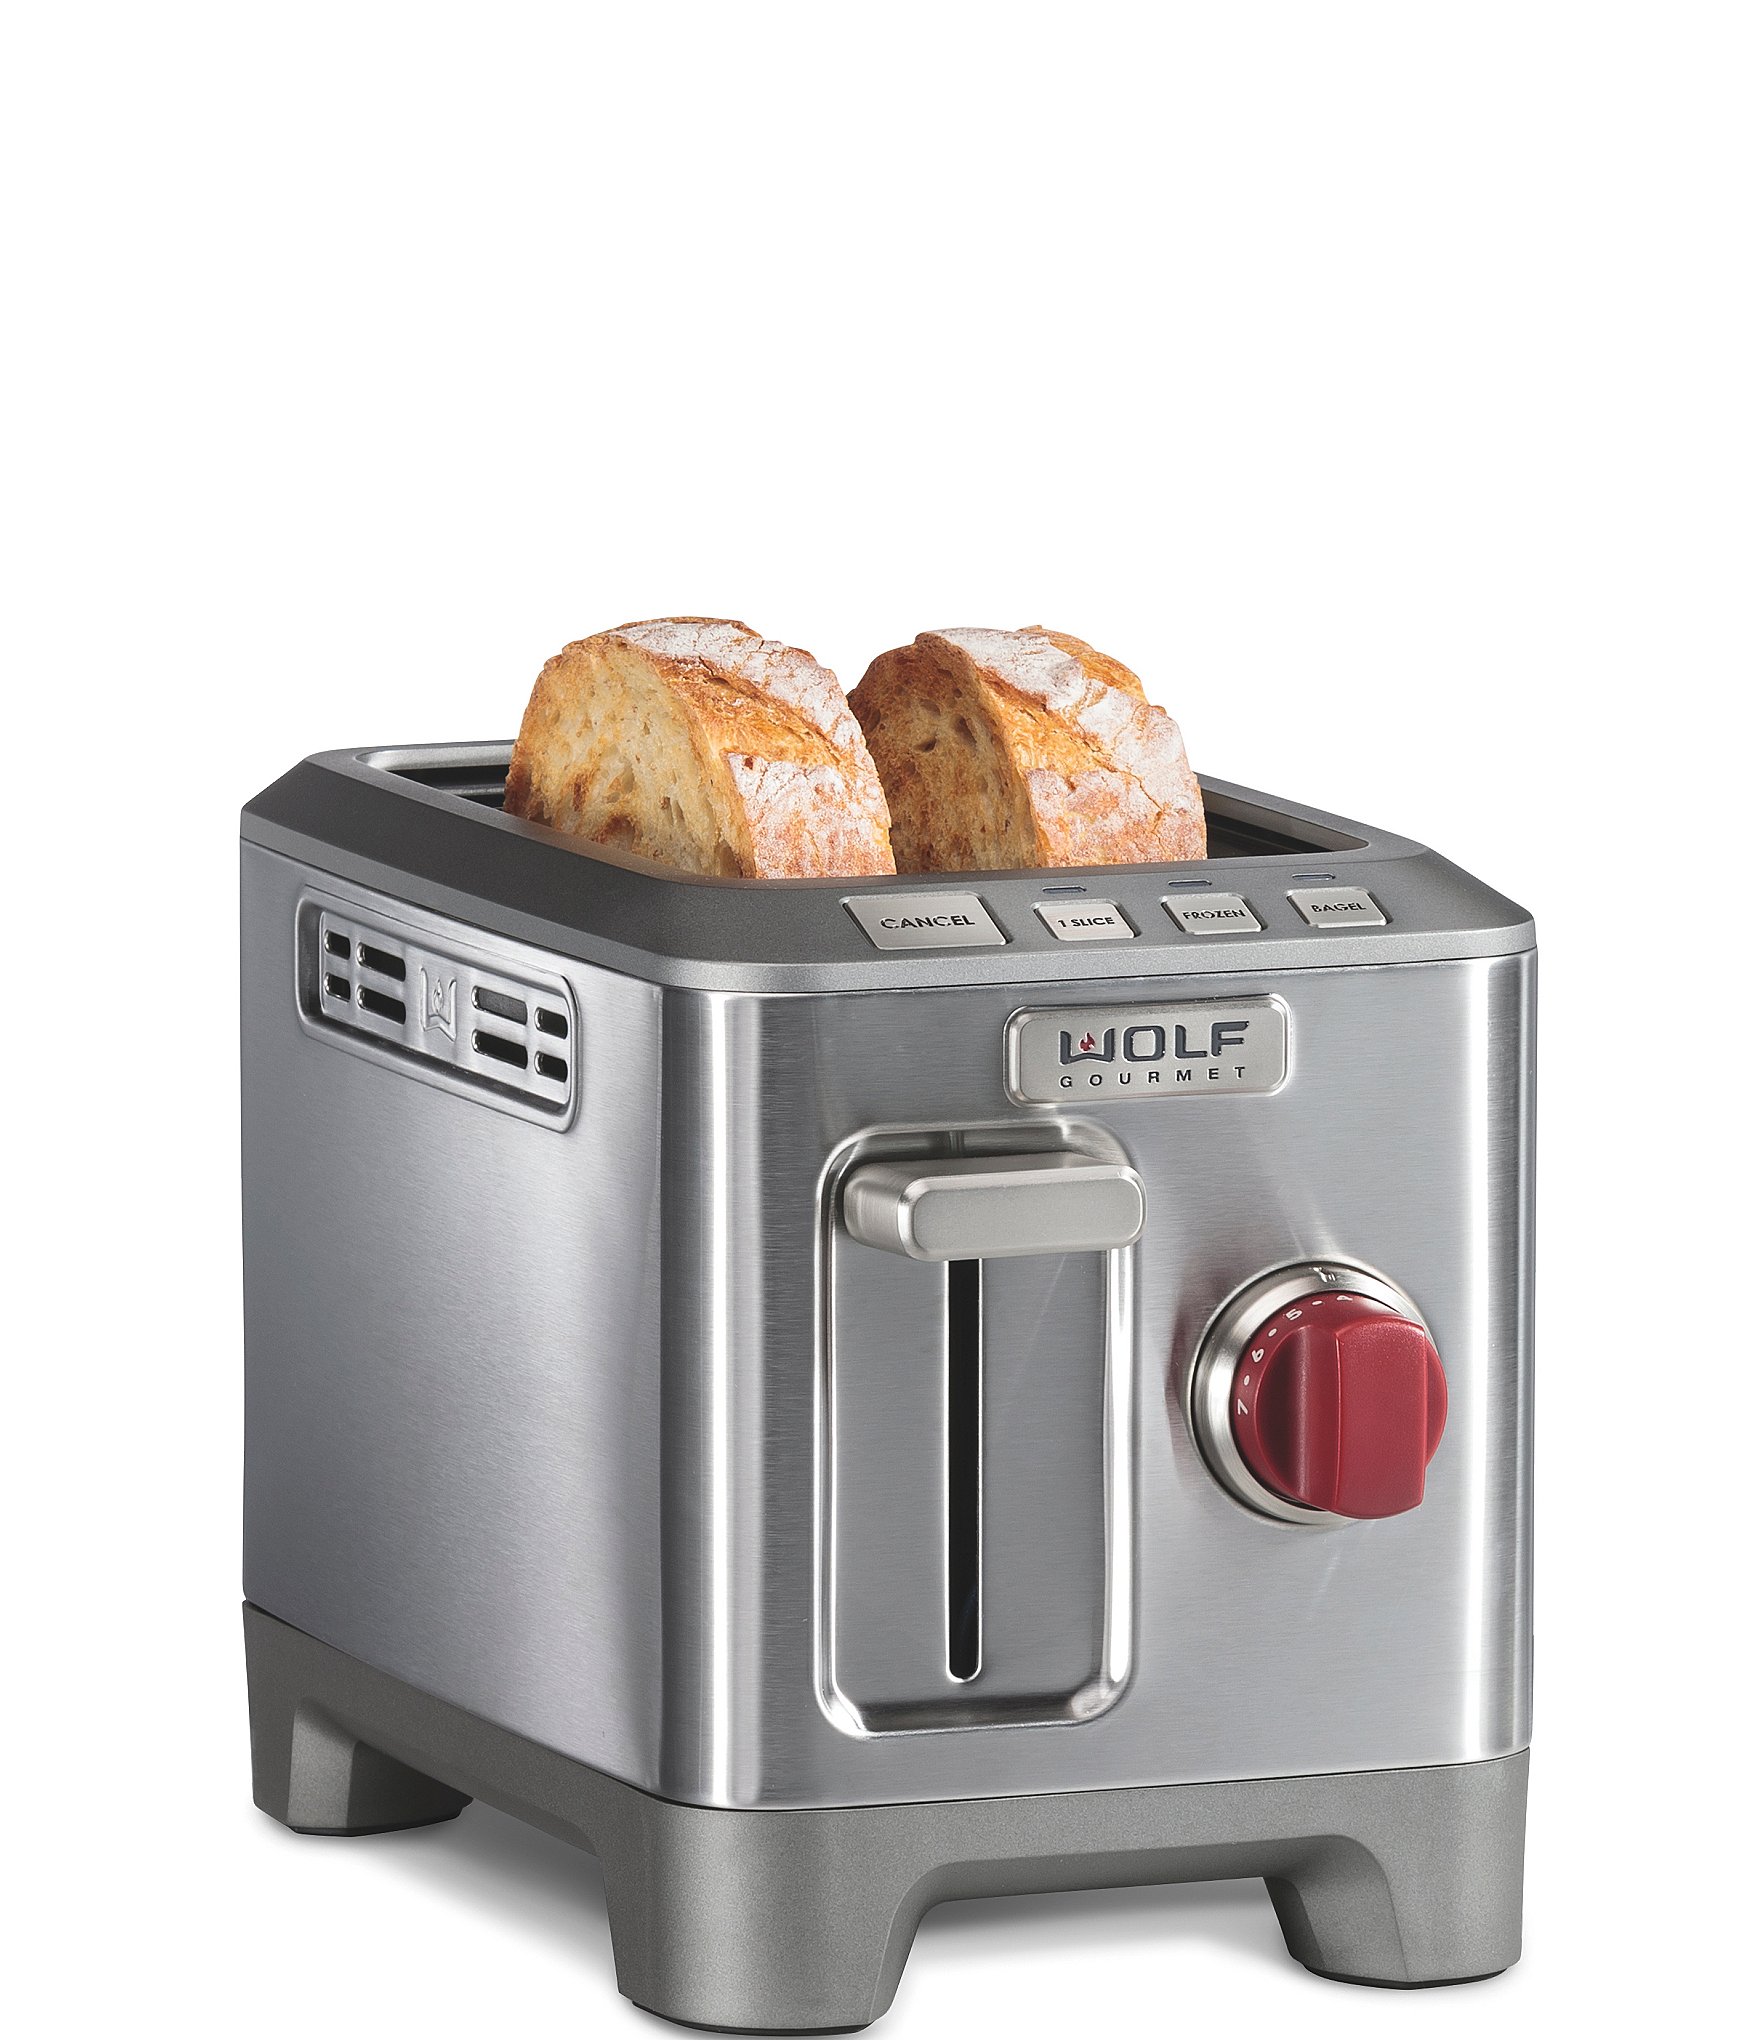 https://dimg.dillards.com/is/image/DillardsZoom/zoom/wolf-gourmet-two-slice-toaster-with-red-knob/00000000_zi_20369082.jpg